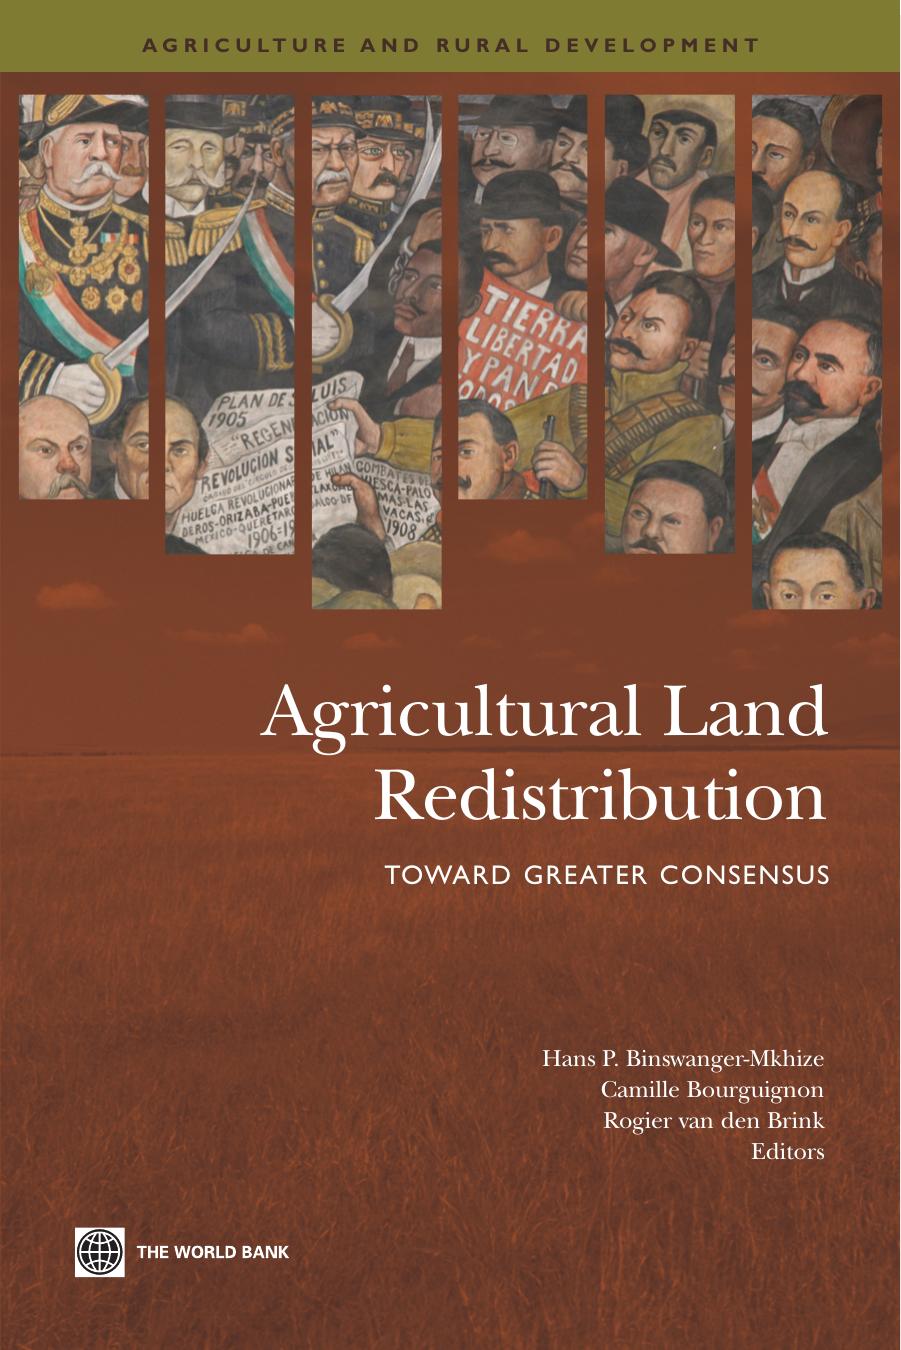 Agricultural Land Redistribution Toward Greater Consensus 2009